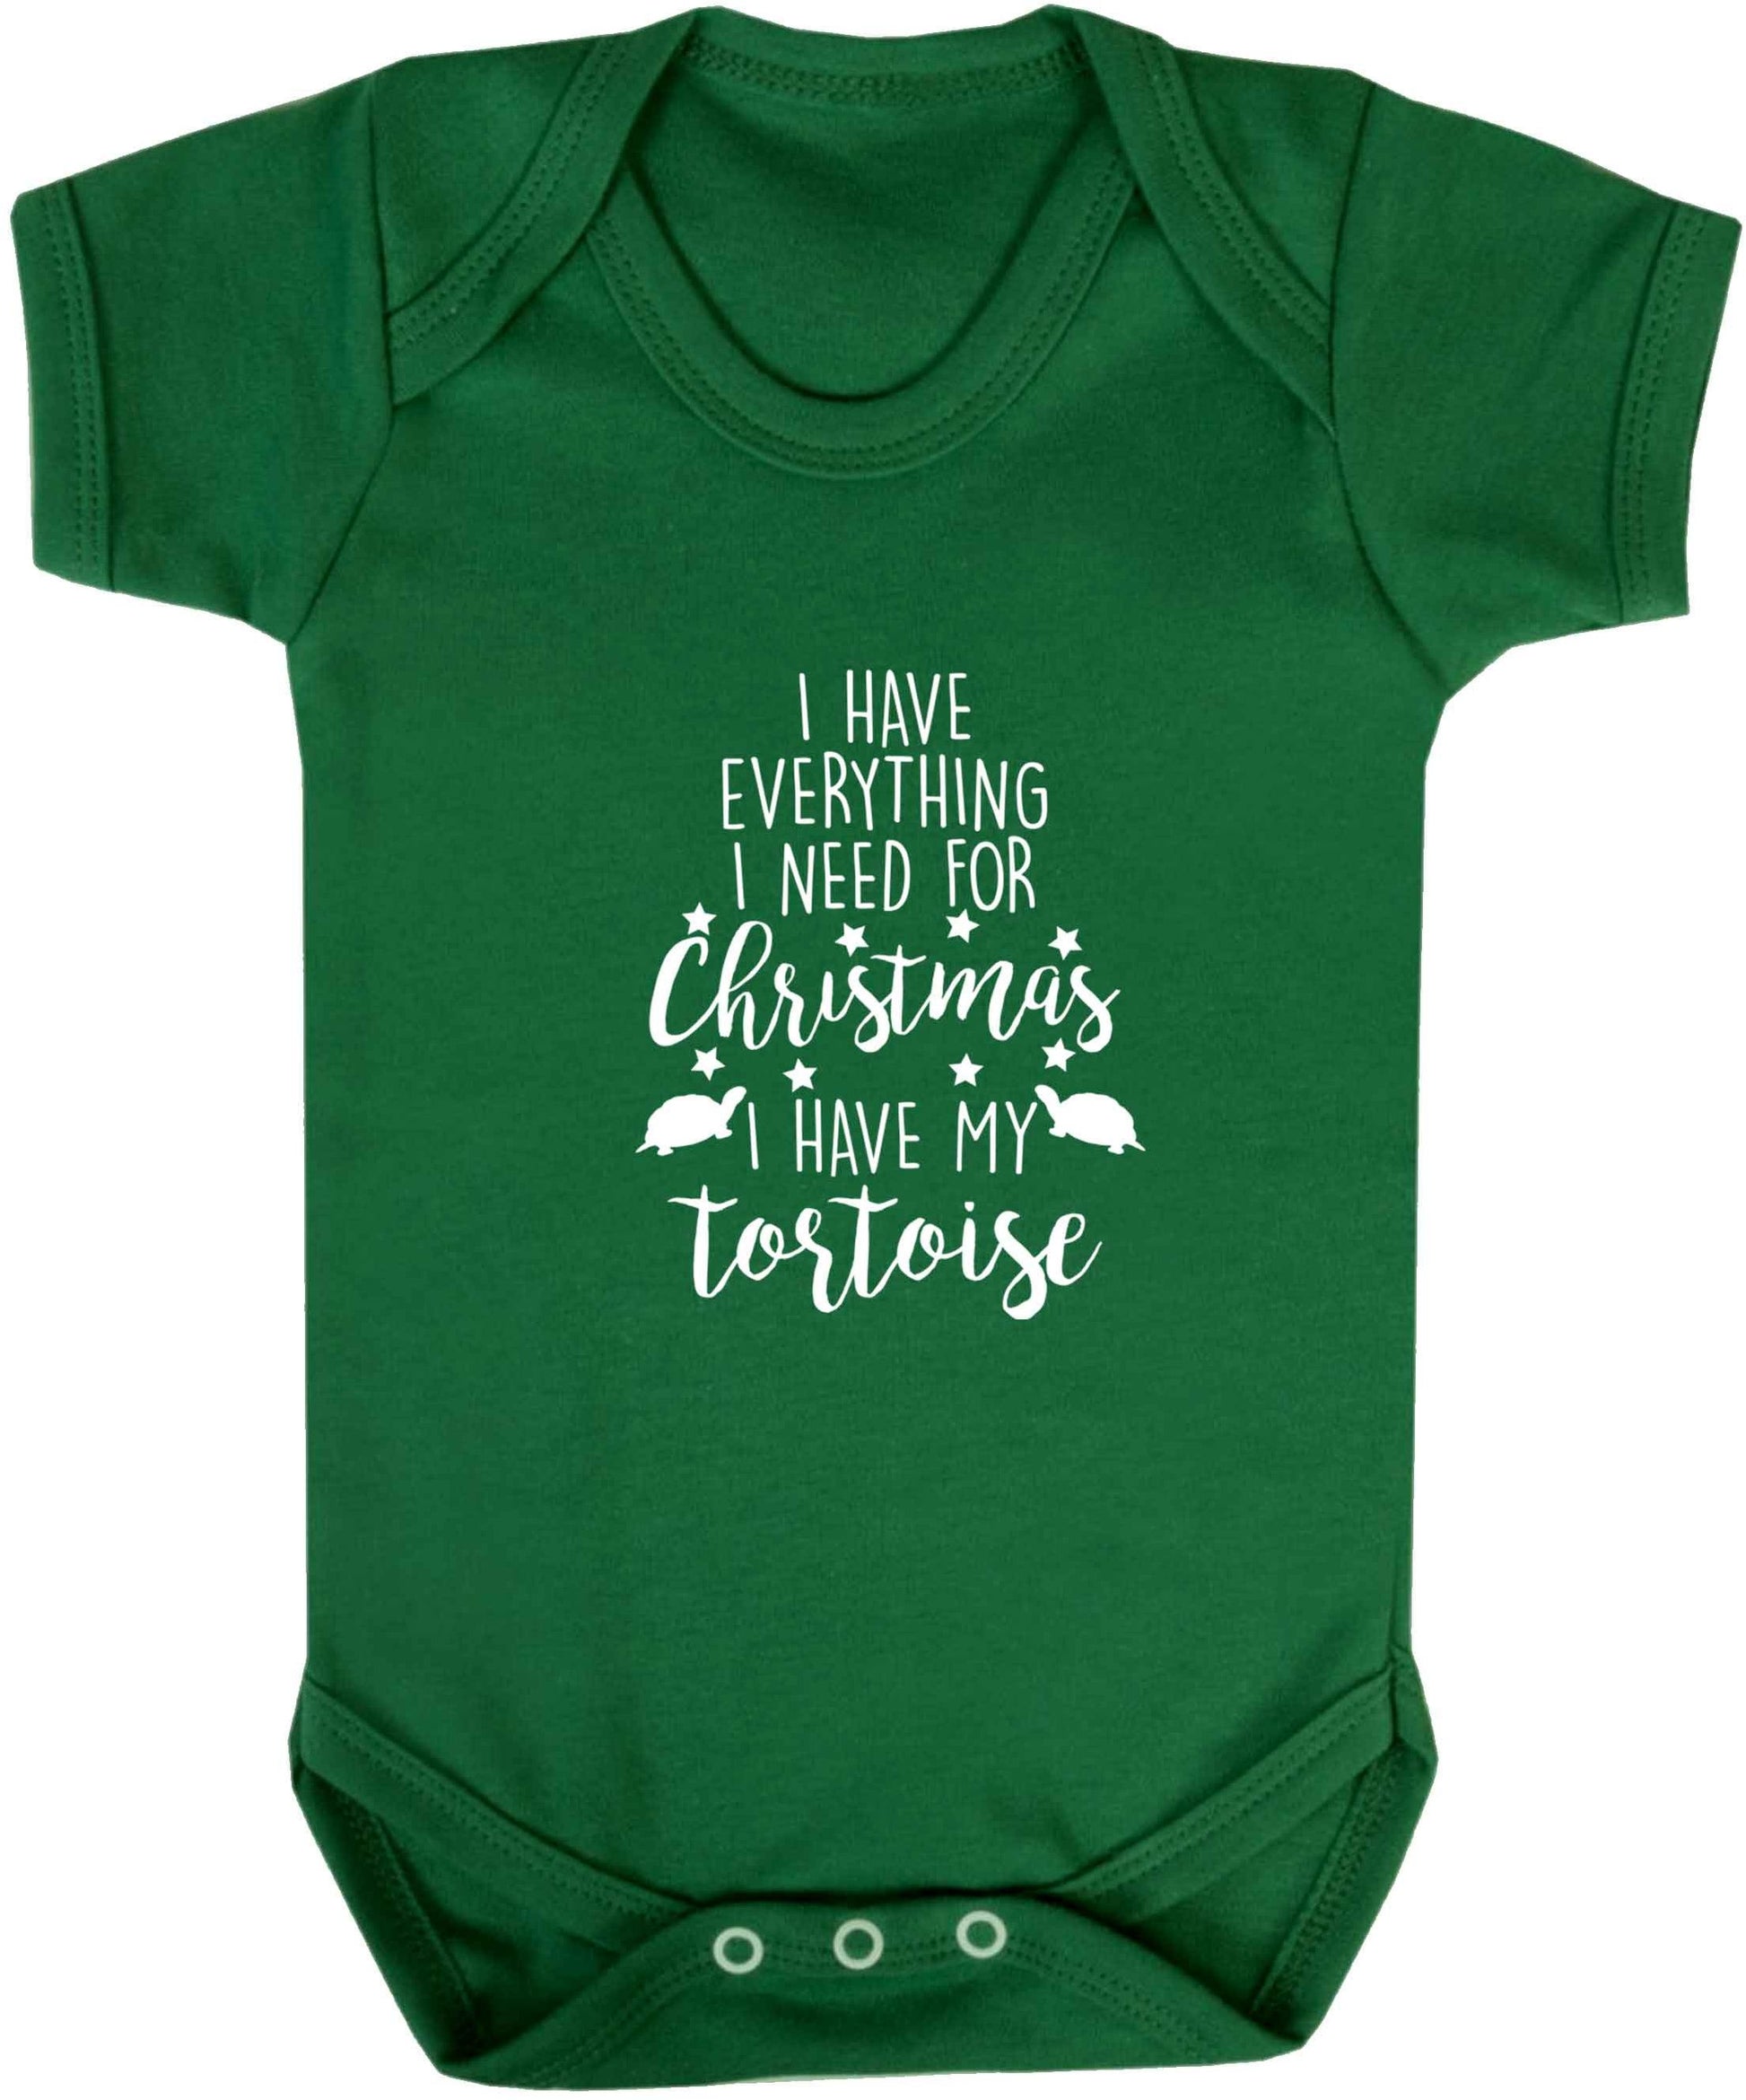 I have everything I need for Christmas I have my tortoise baby vest green 18-24 months